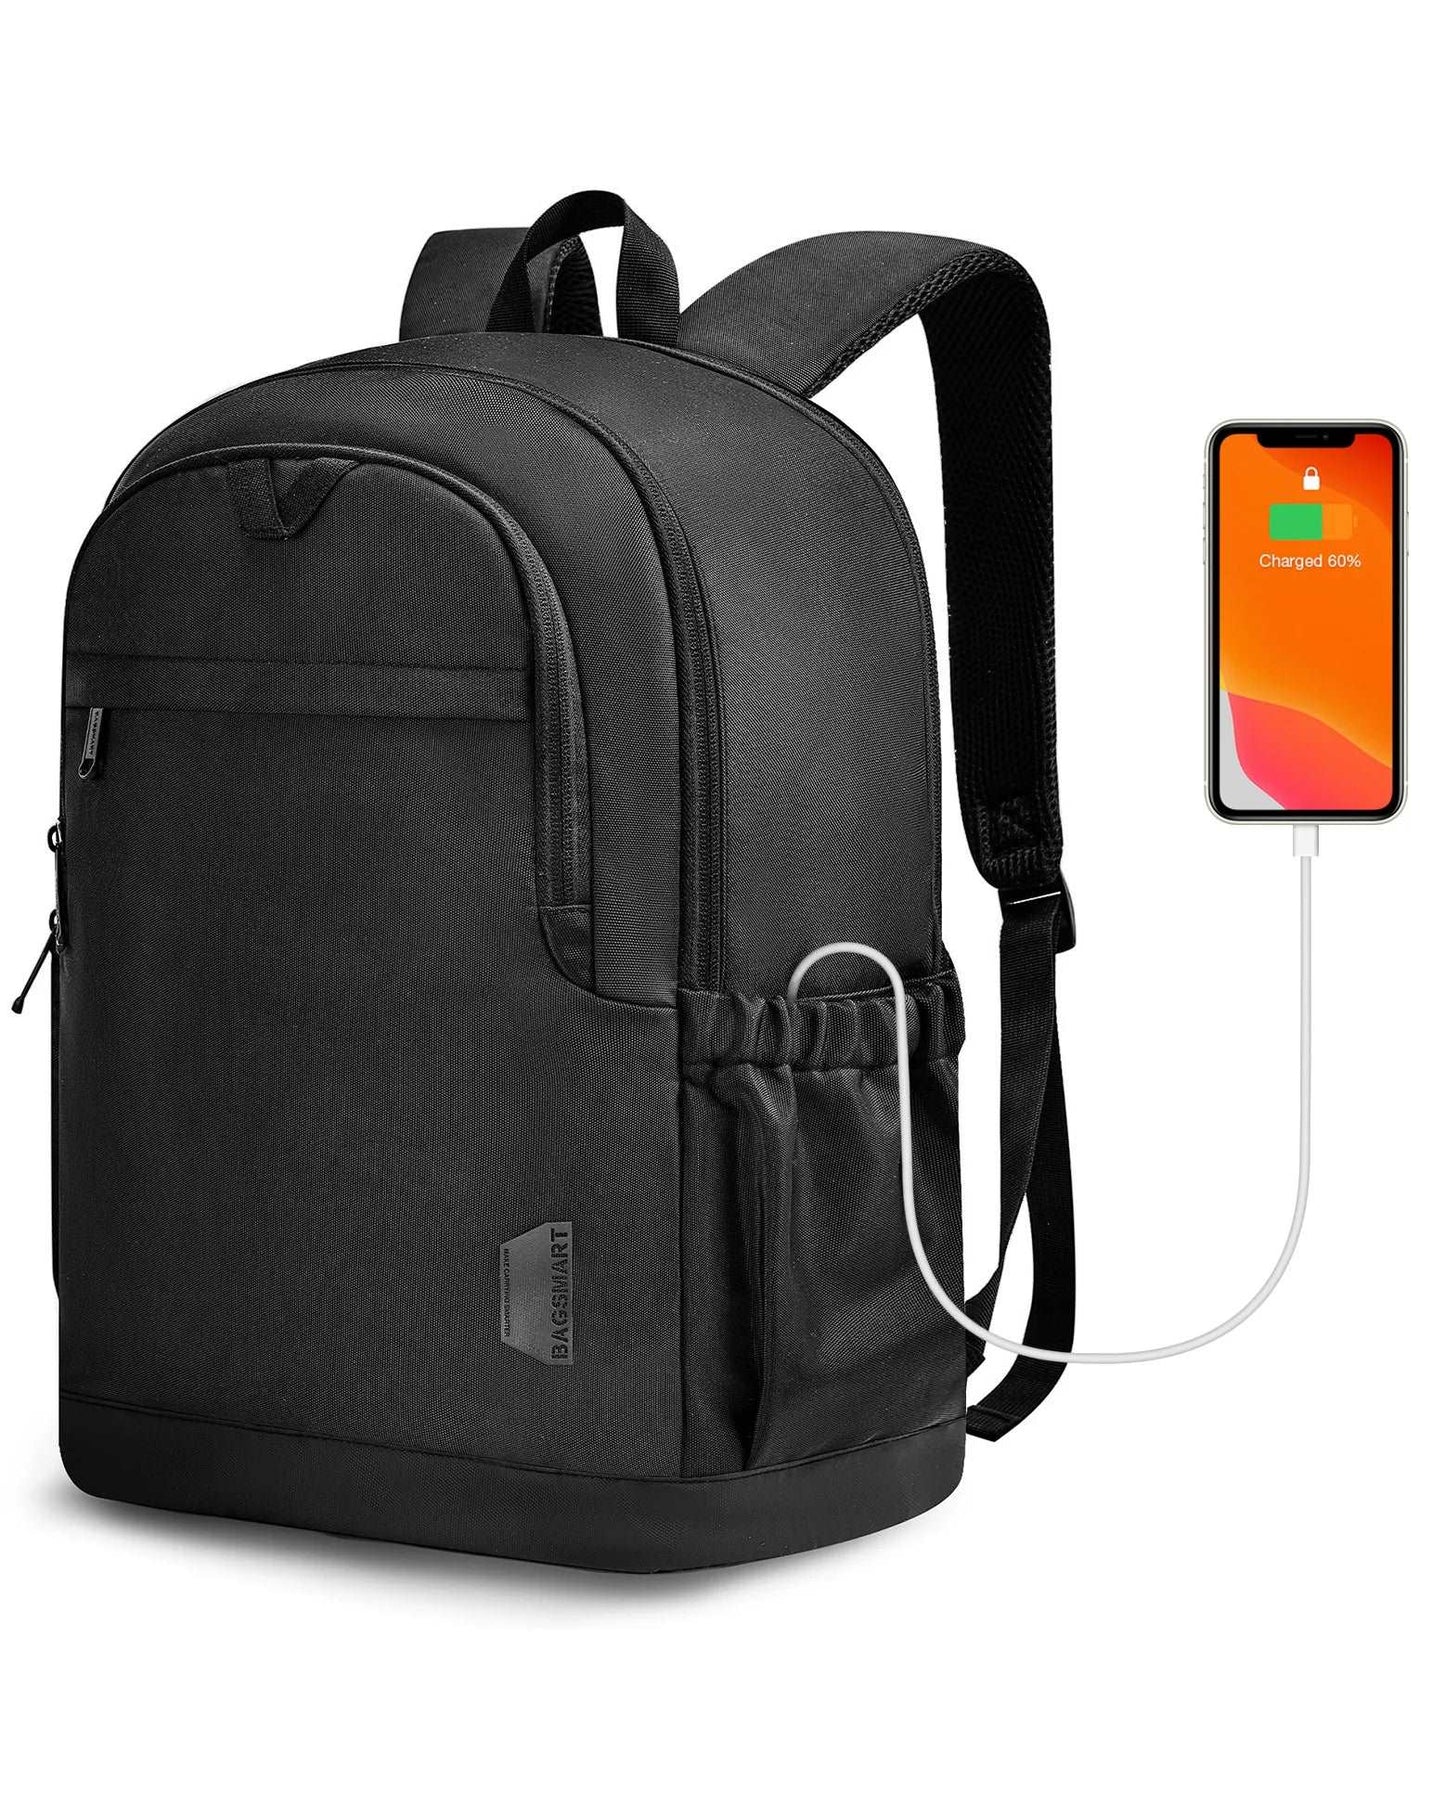 BAGSMART Men's/Women's Backpack Anti-theft Large Waterproof with USB Charging Port 15.6inch laptop Black2